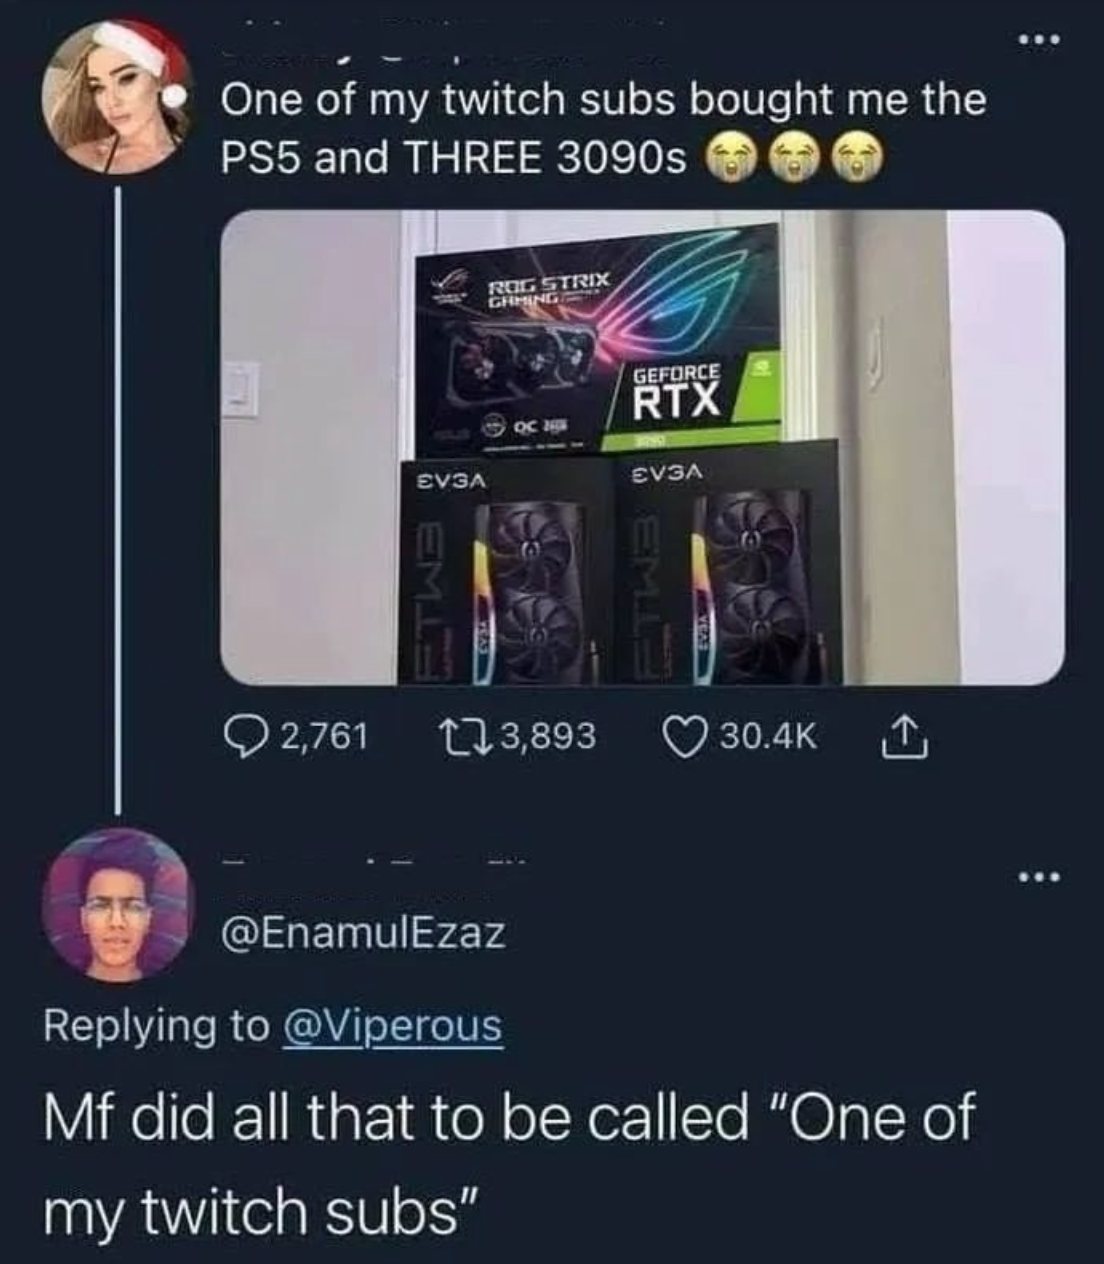 funny gaming memes  - kalei renay - ... One of my twitch subs bought me the PS5 and Three 3090s Restrix Ce Geforce Rtx Evsa Cvsa 2,761 23,893 . Mf did all that to be called "One of my twitch subs"